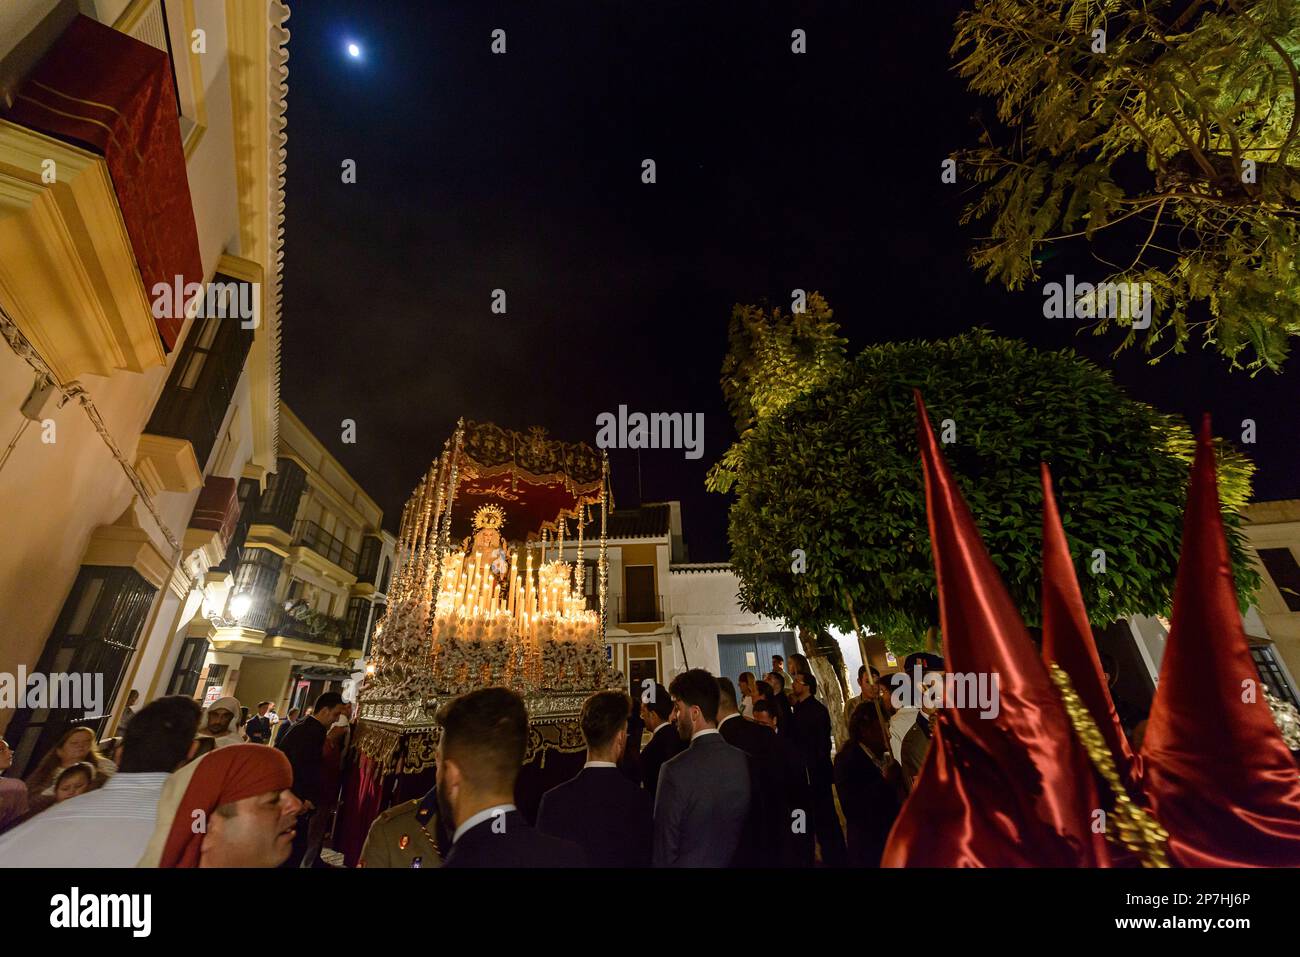 Arahal. Seville. Spain. 14th April, 2022. The pallium of the Misericordia brotherhood during the procession on Maundy Thursday. Stock Photo